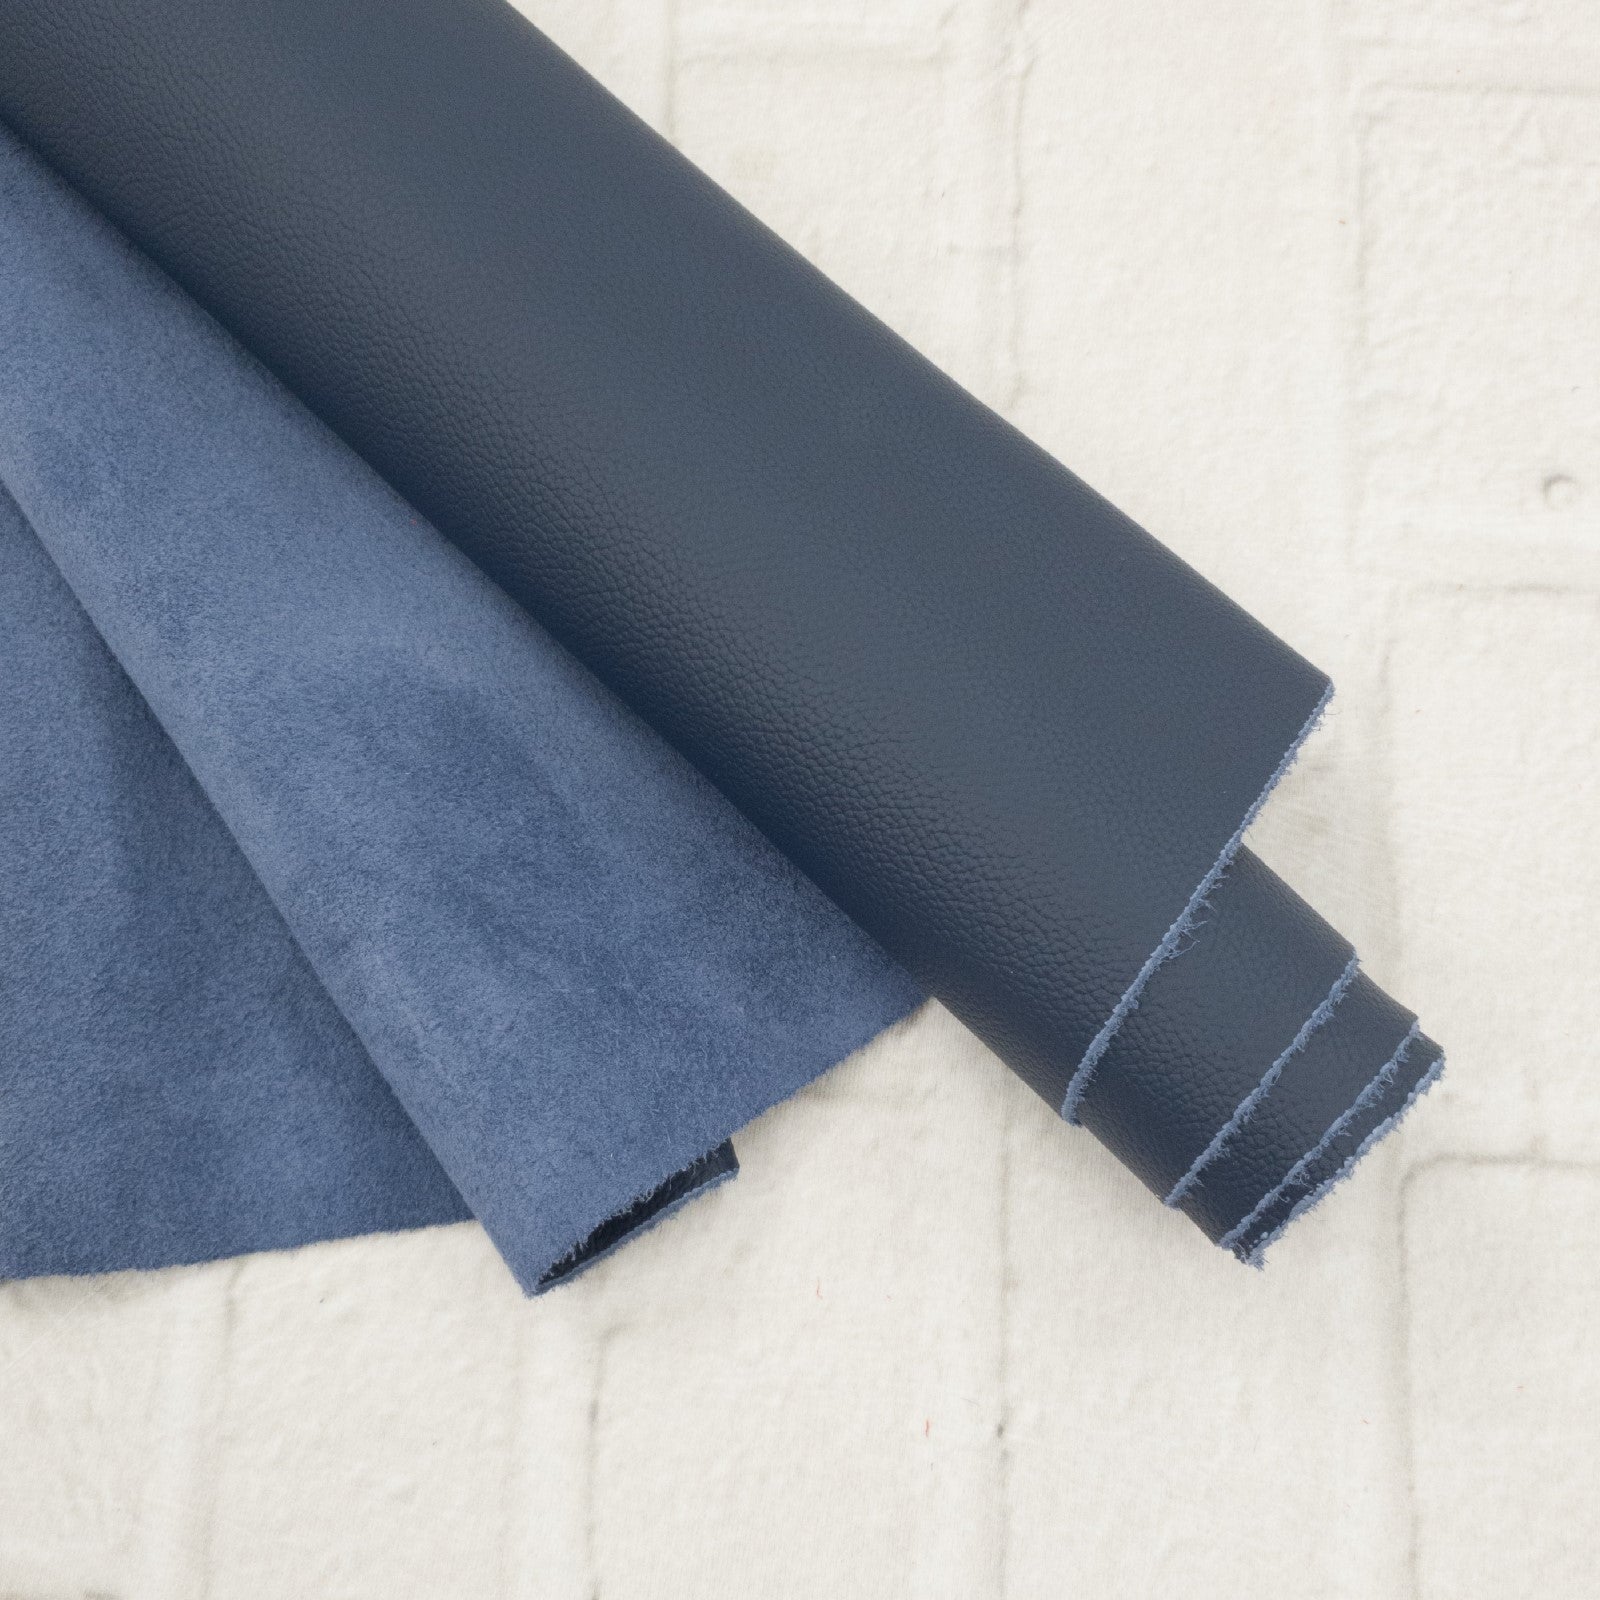 Military Blue, 5.5-20 Sq Ft, 2.5-3 oz Cow Hides, Vital Upholstery Collection,  | The Leather Guy